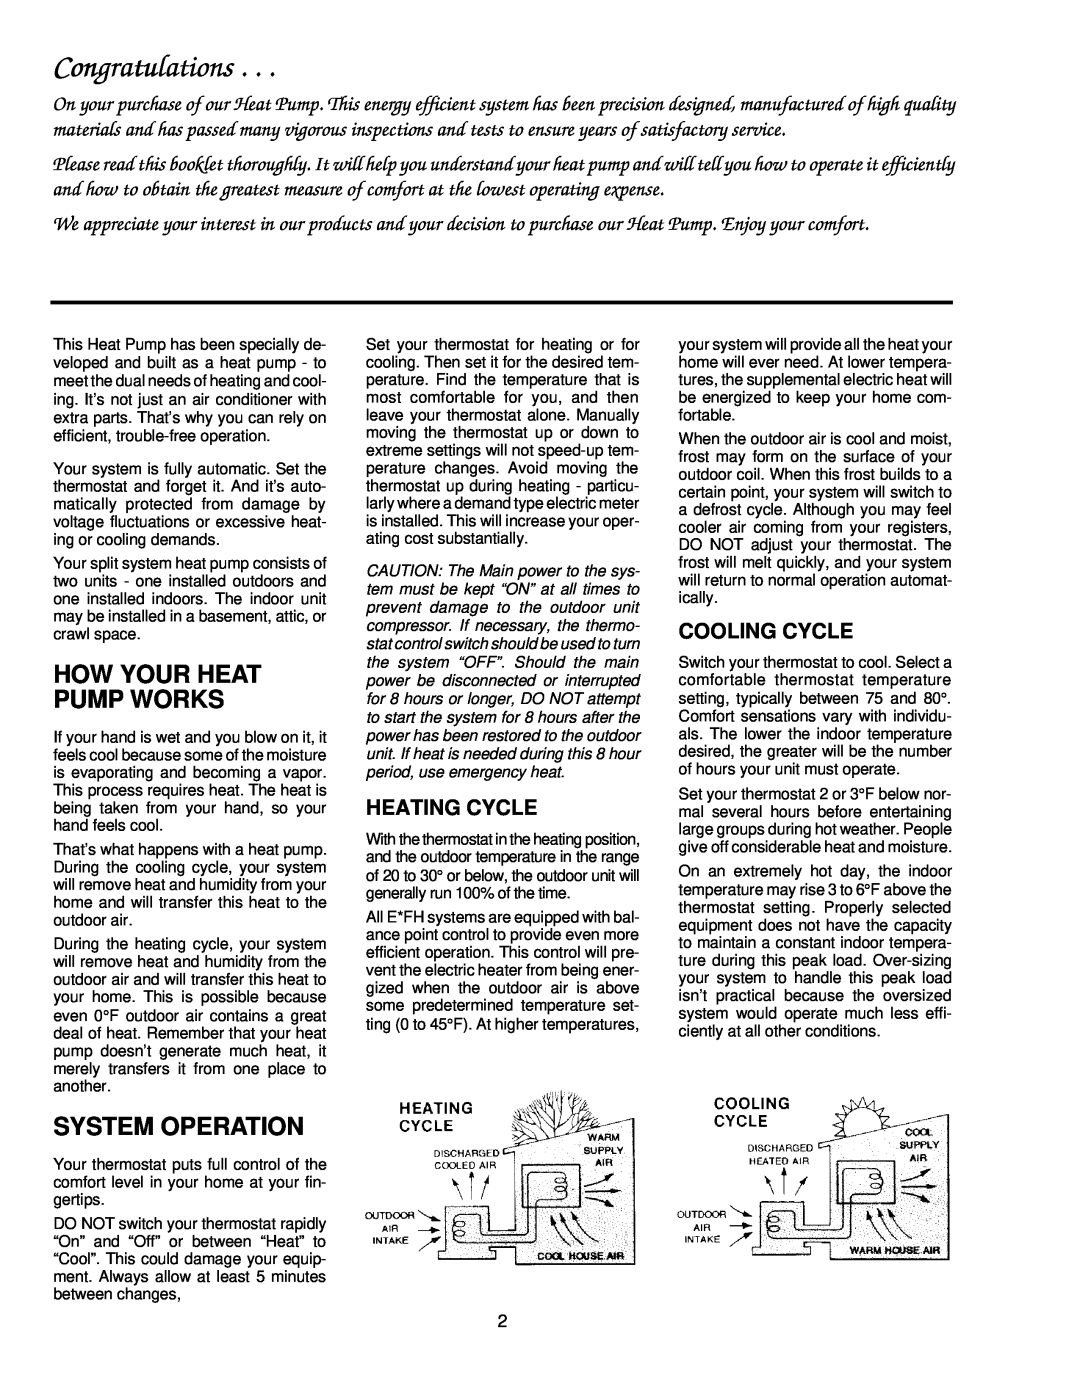 York 035-09319 manual How Your Heat Pump Works, System Operation, Heating Cycle, Cooling Cycle, Congratulations 